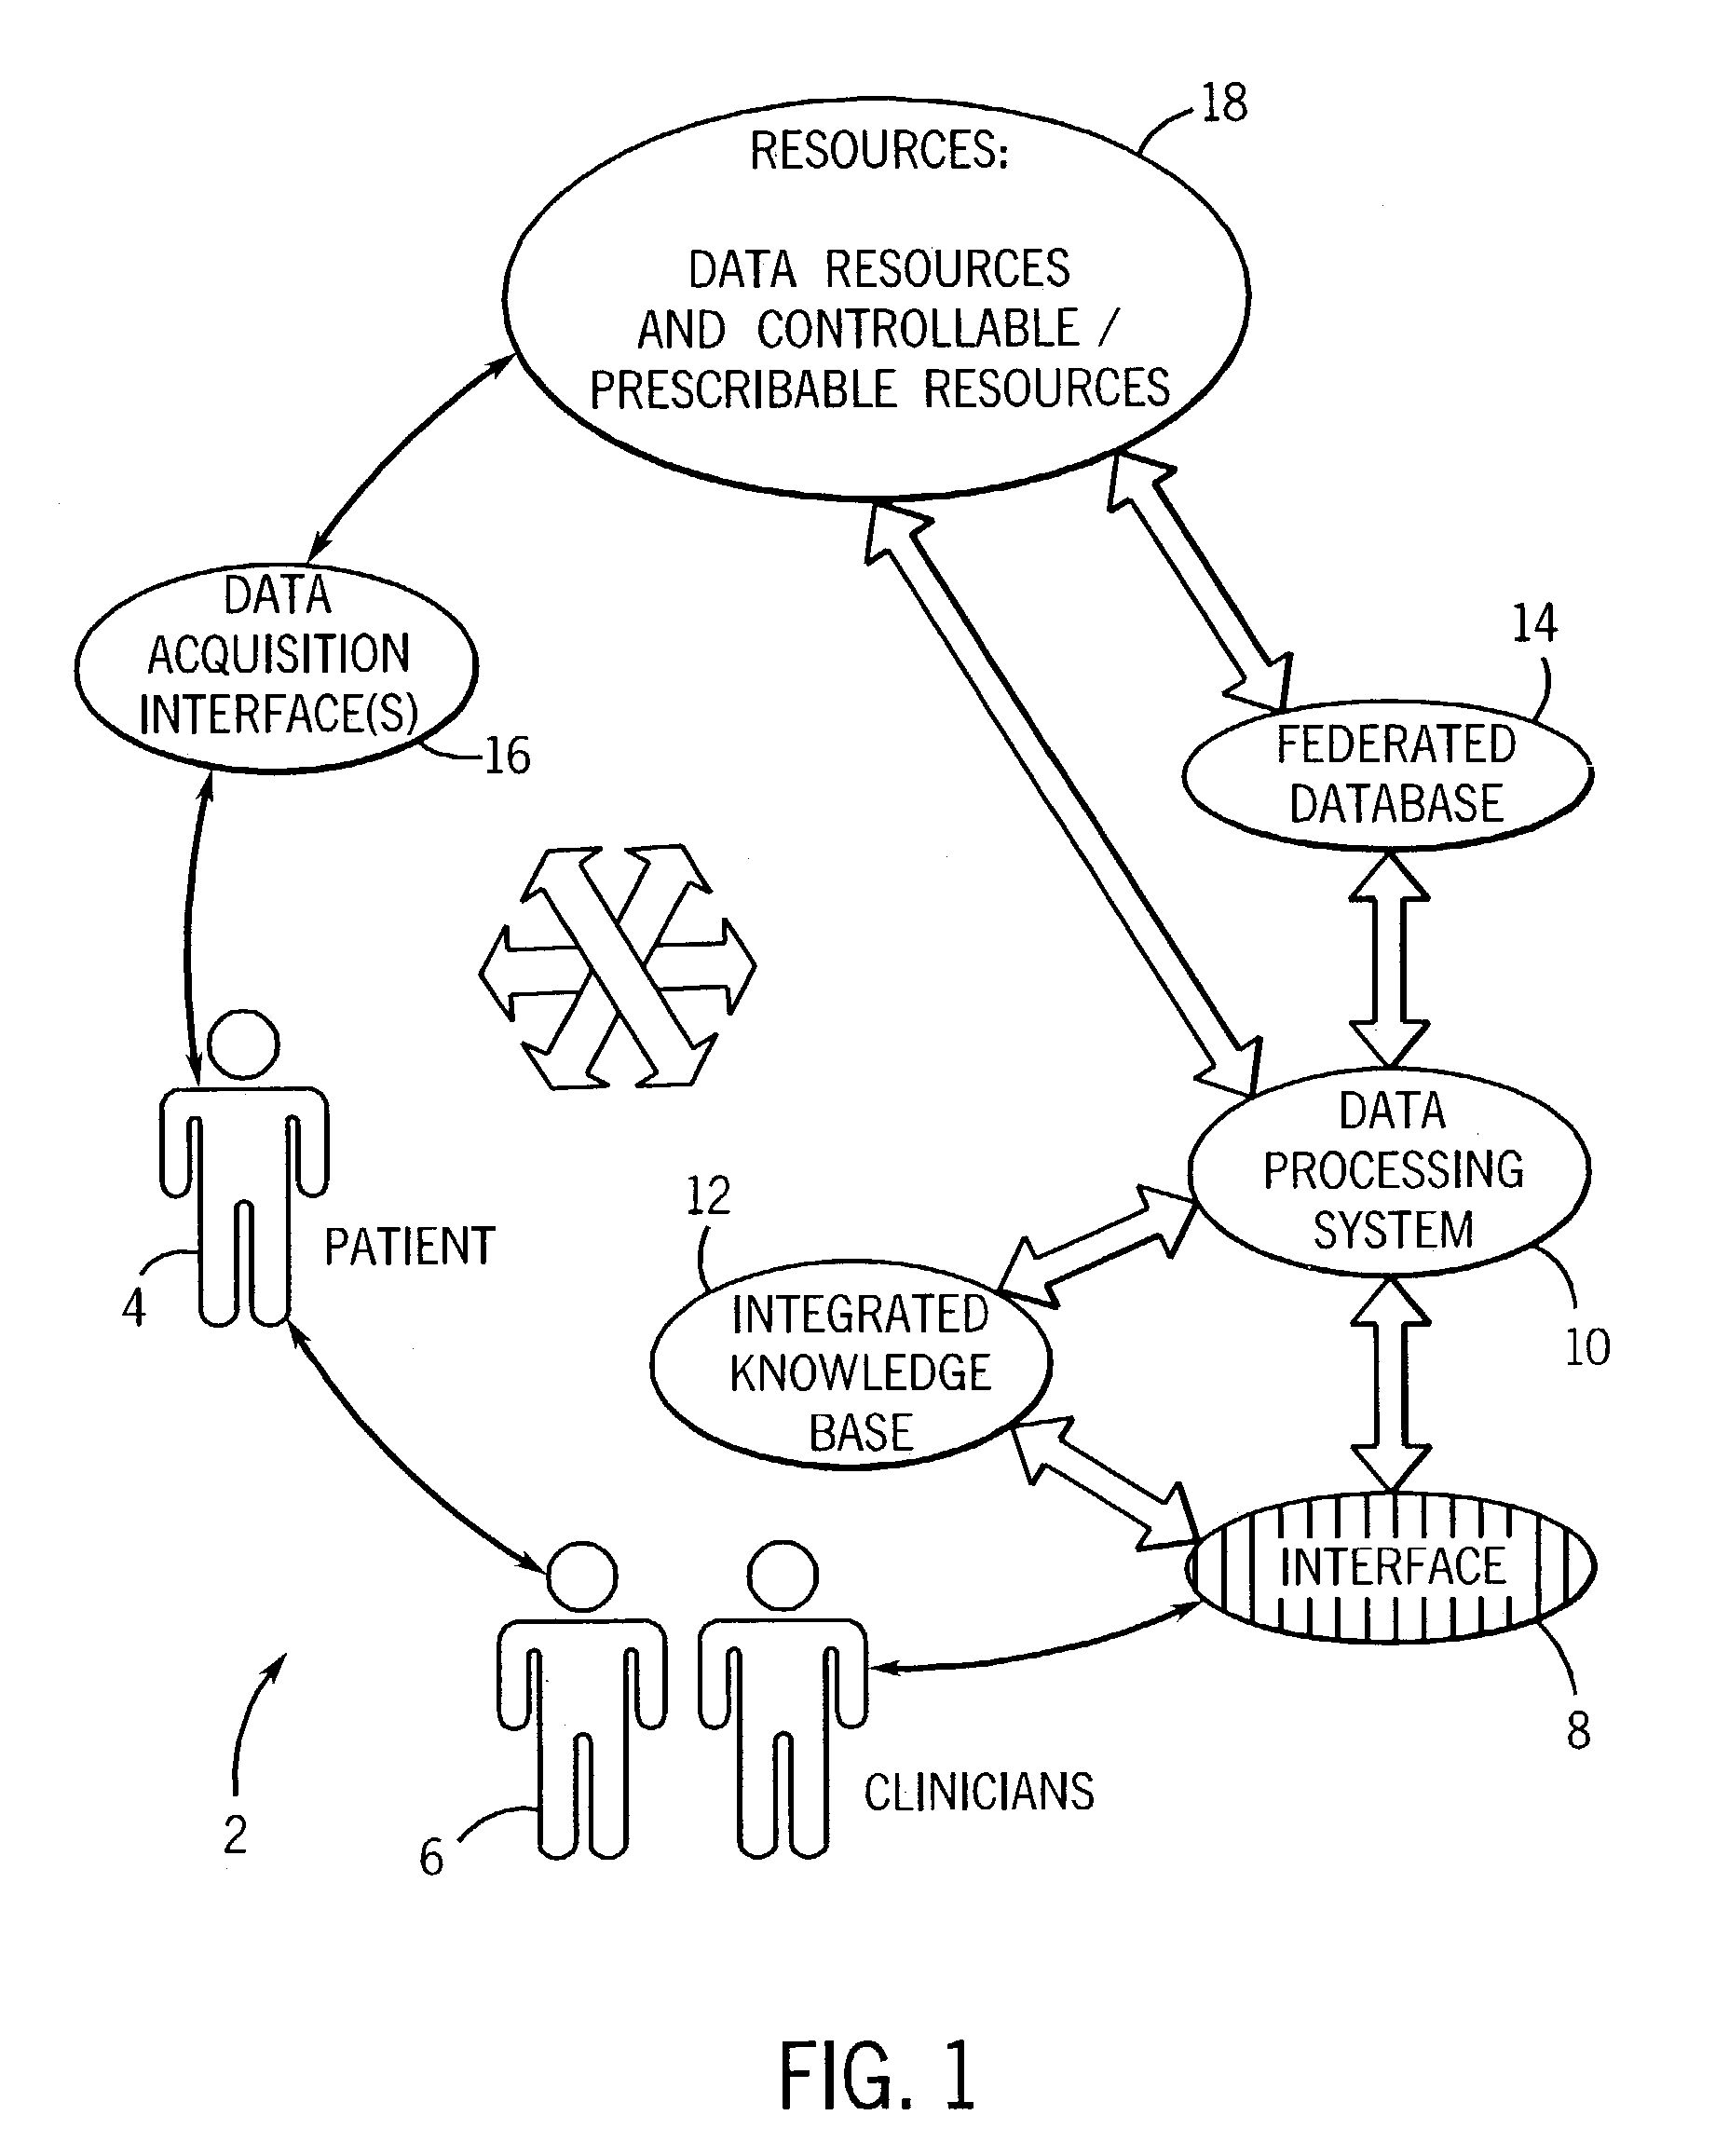 Computer-assisted data processing system and method incorporating automated learning